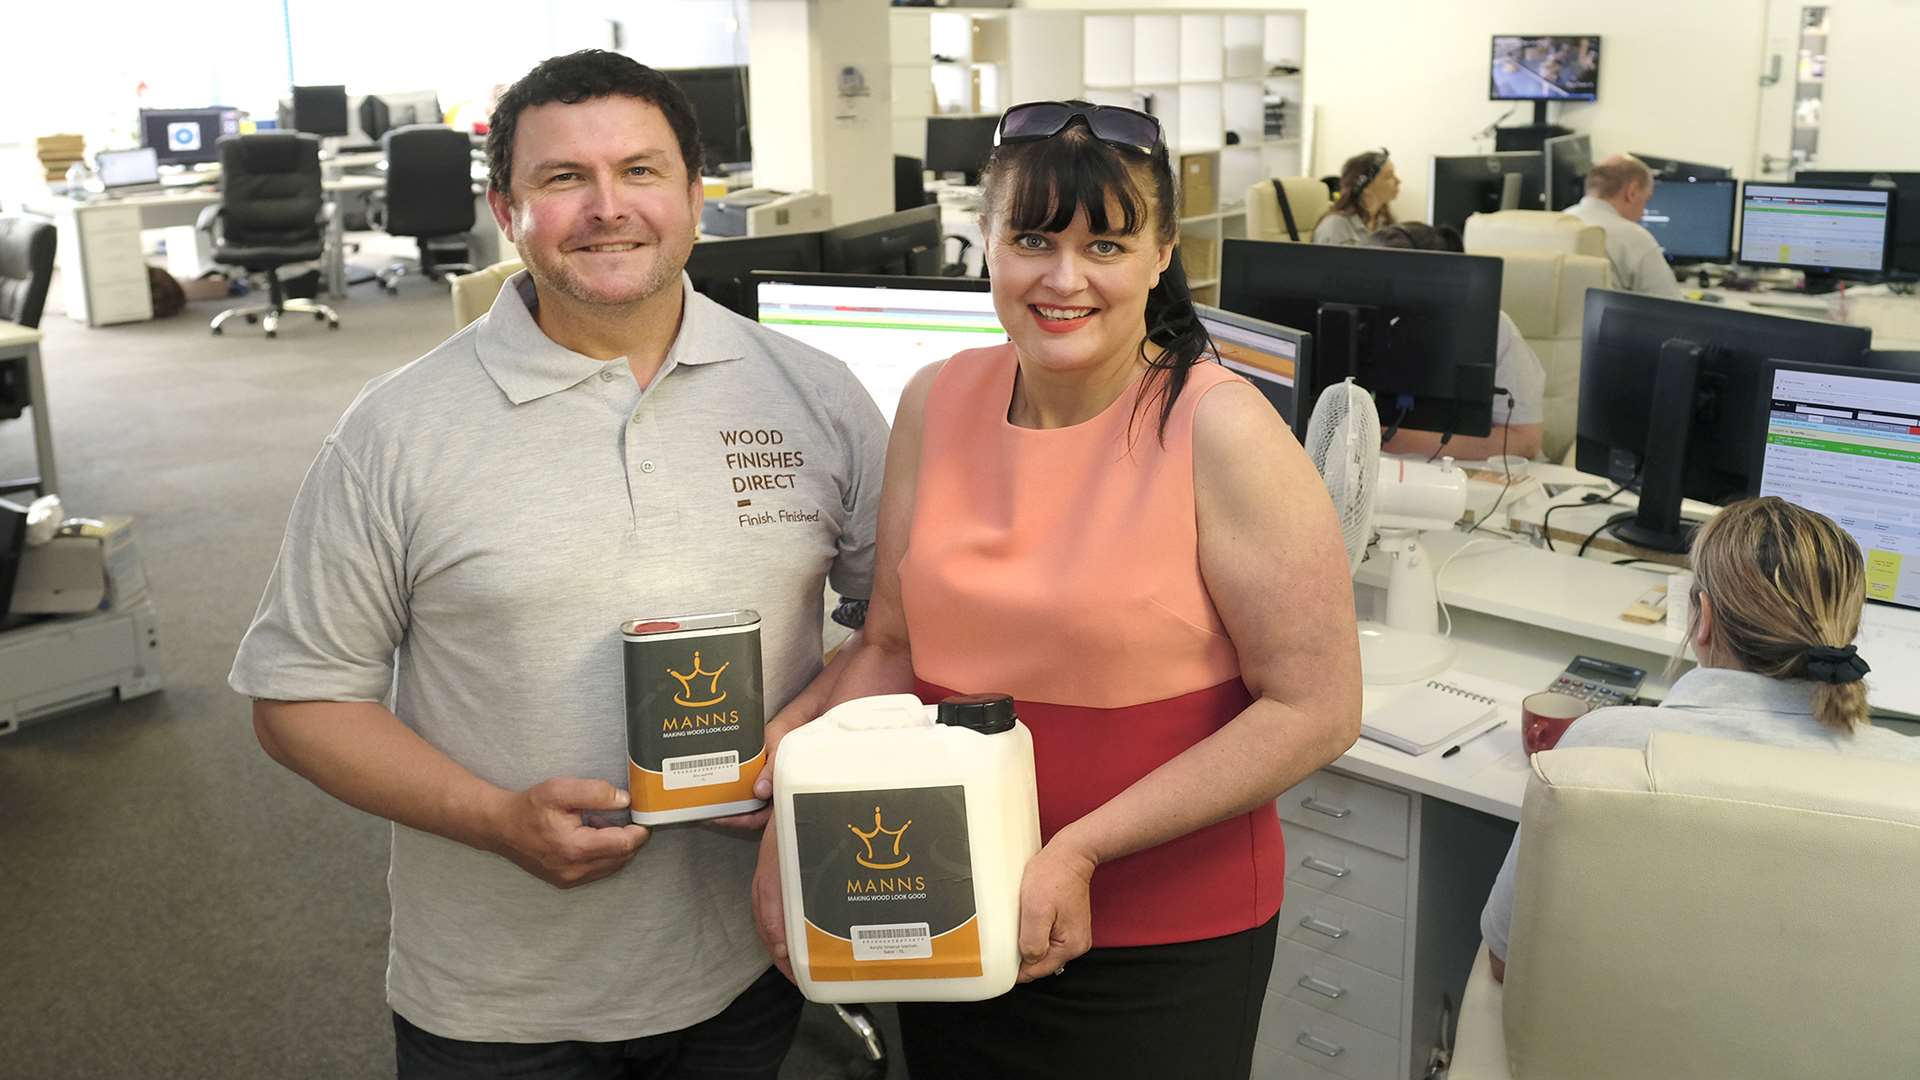 Wood Finishes Direct director Laurence Mann with recruitment consultant Lorna Geens from Red Eagle